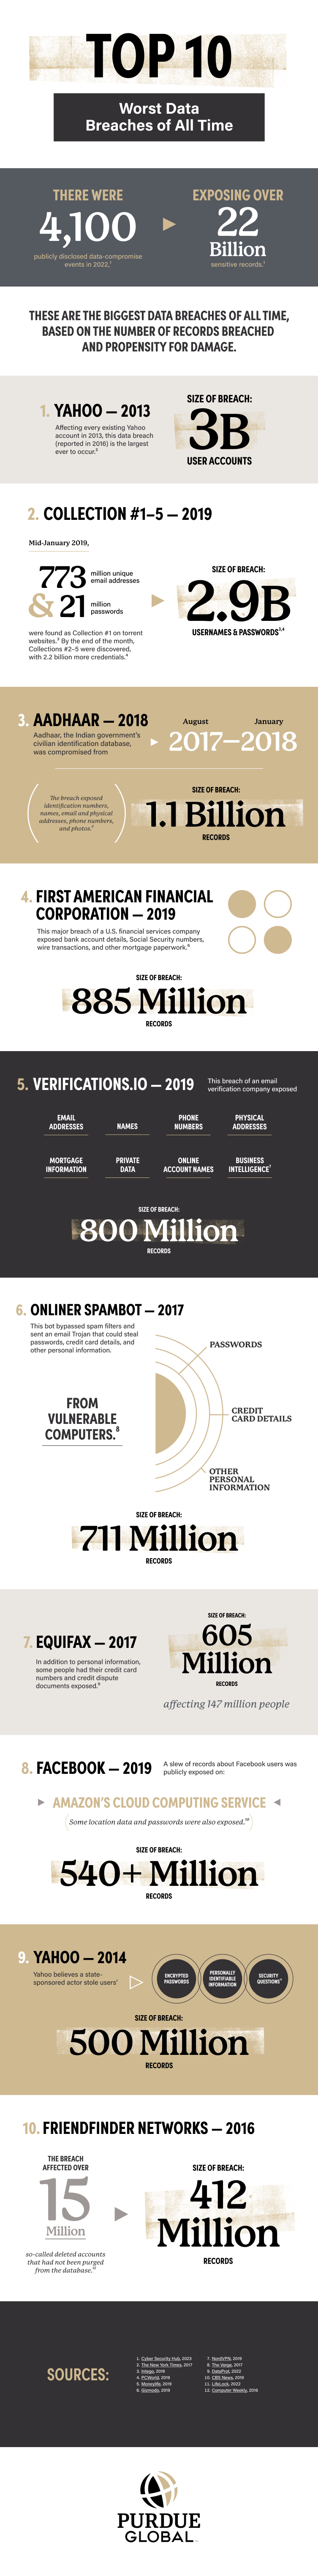 Top 10 Data Breaches Infographic